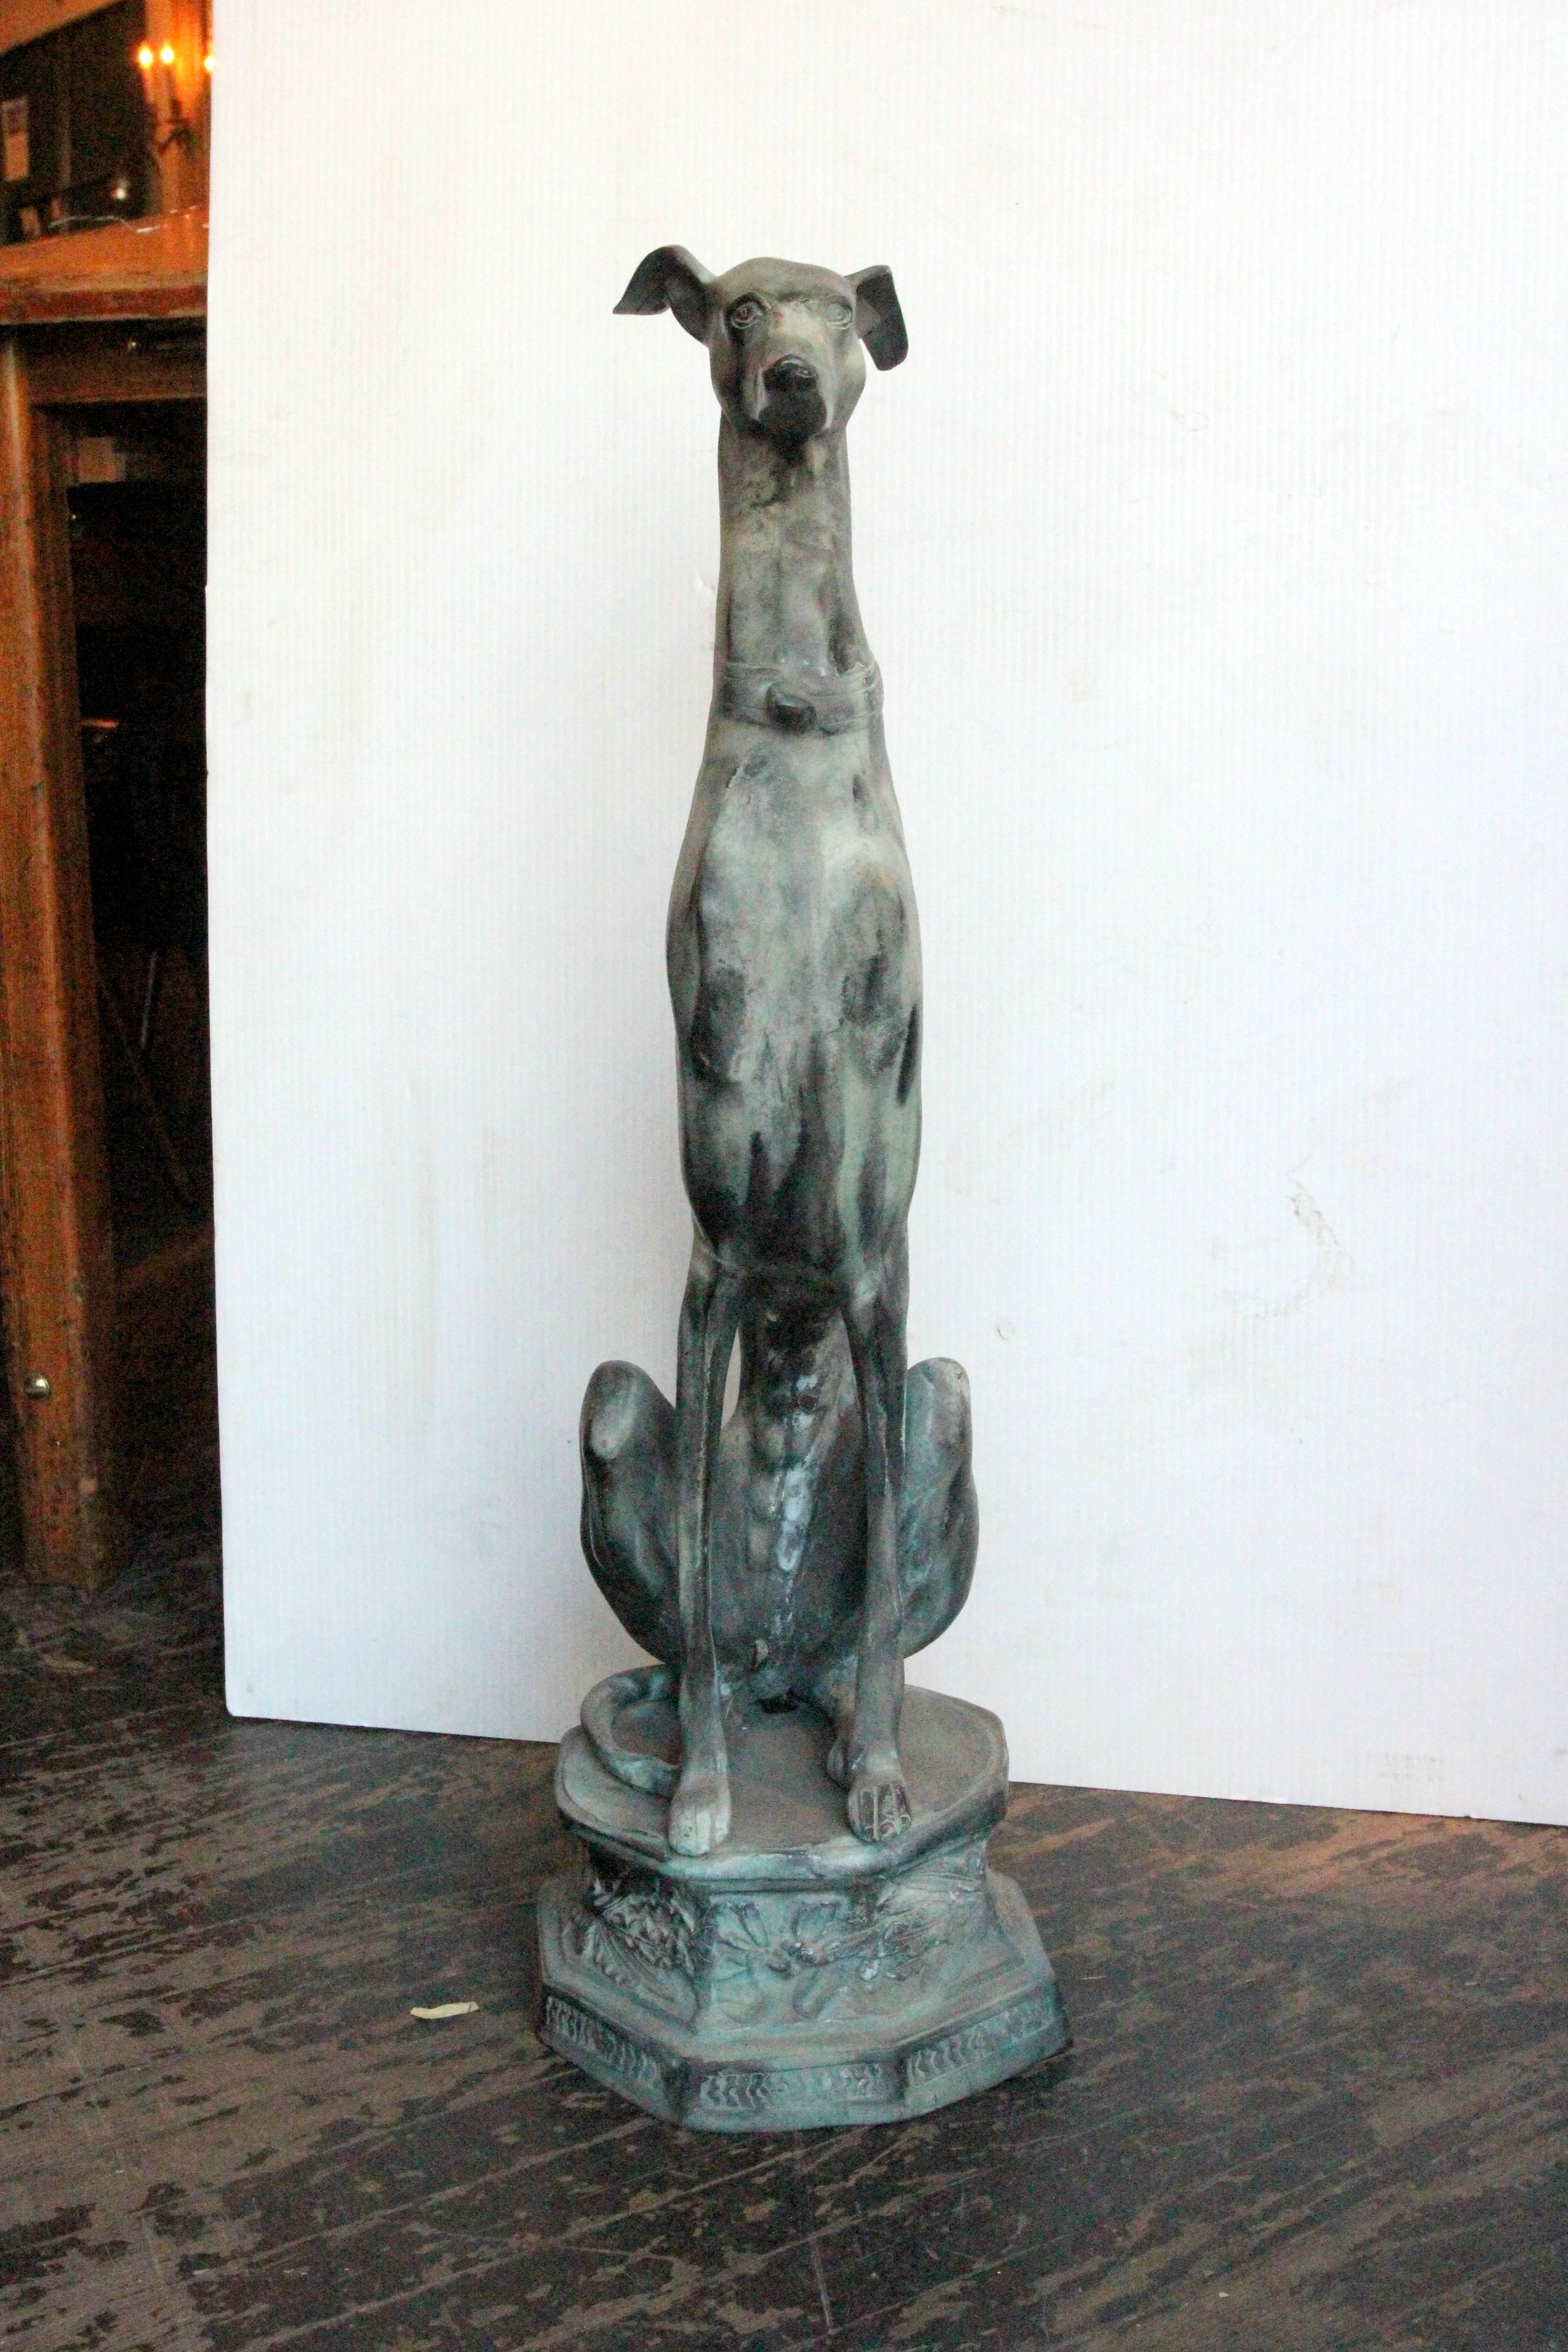 1980s bronze statue of a greyhound sitting attentively with his ears pointed back. This item can be seen at our 302 Bowery location in Manhattan.